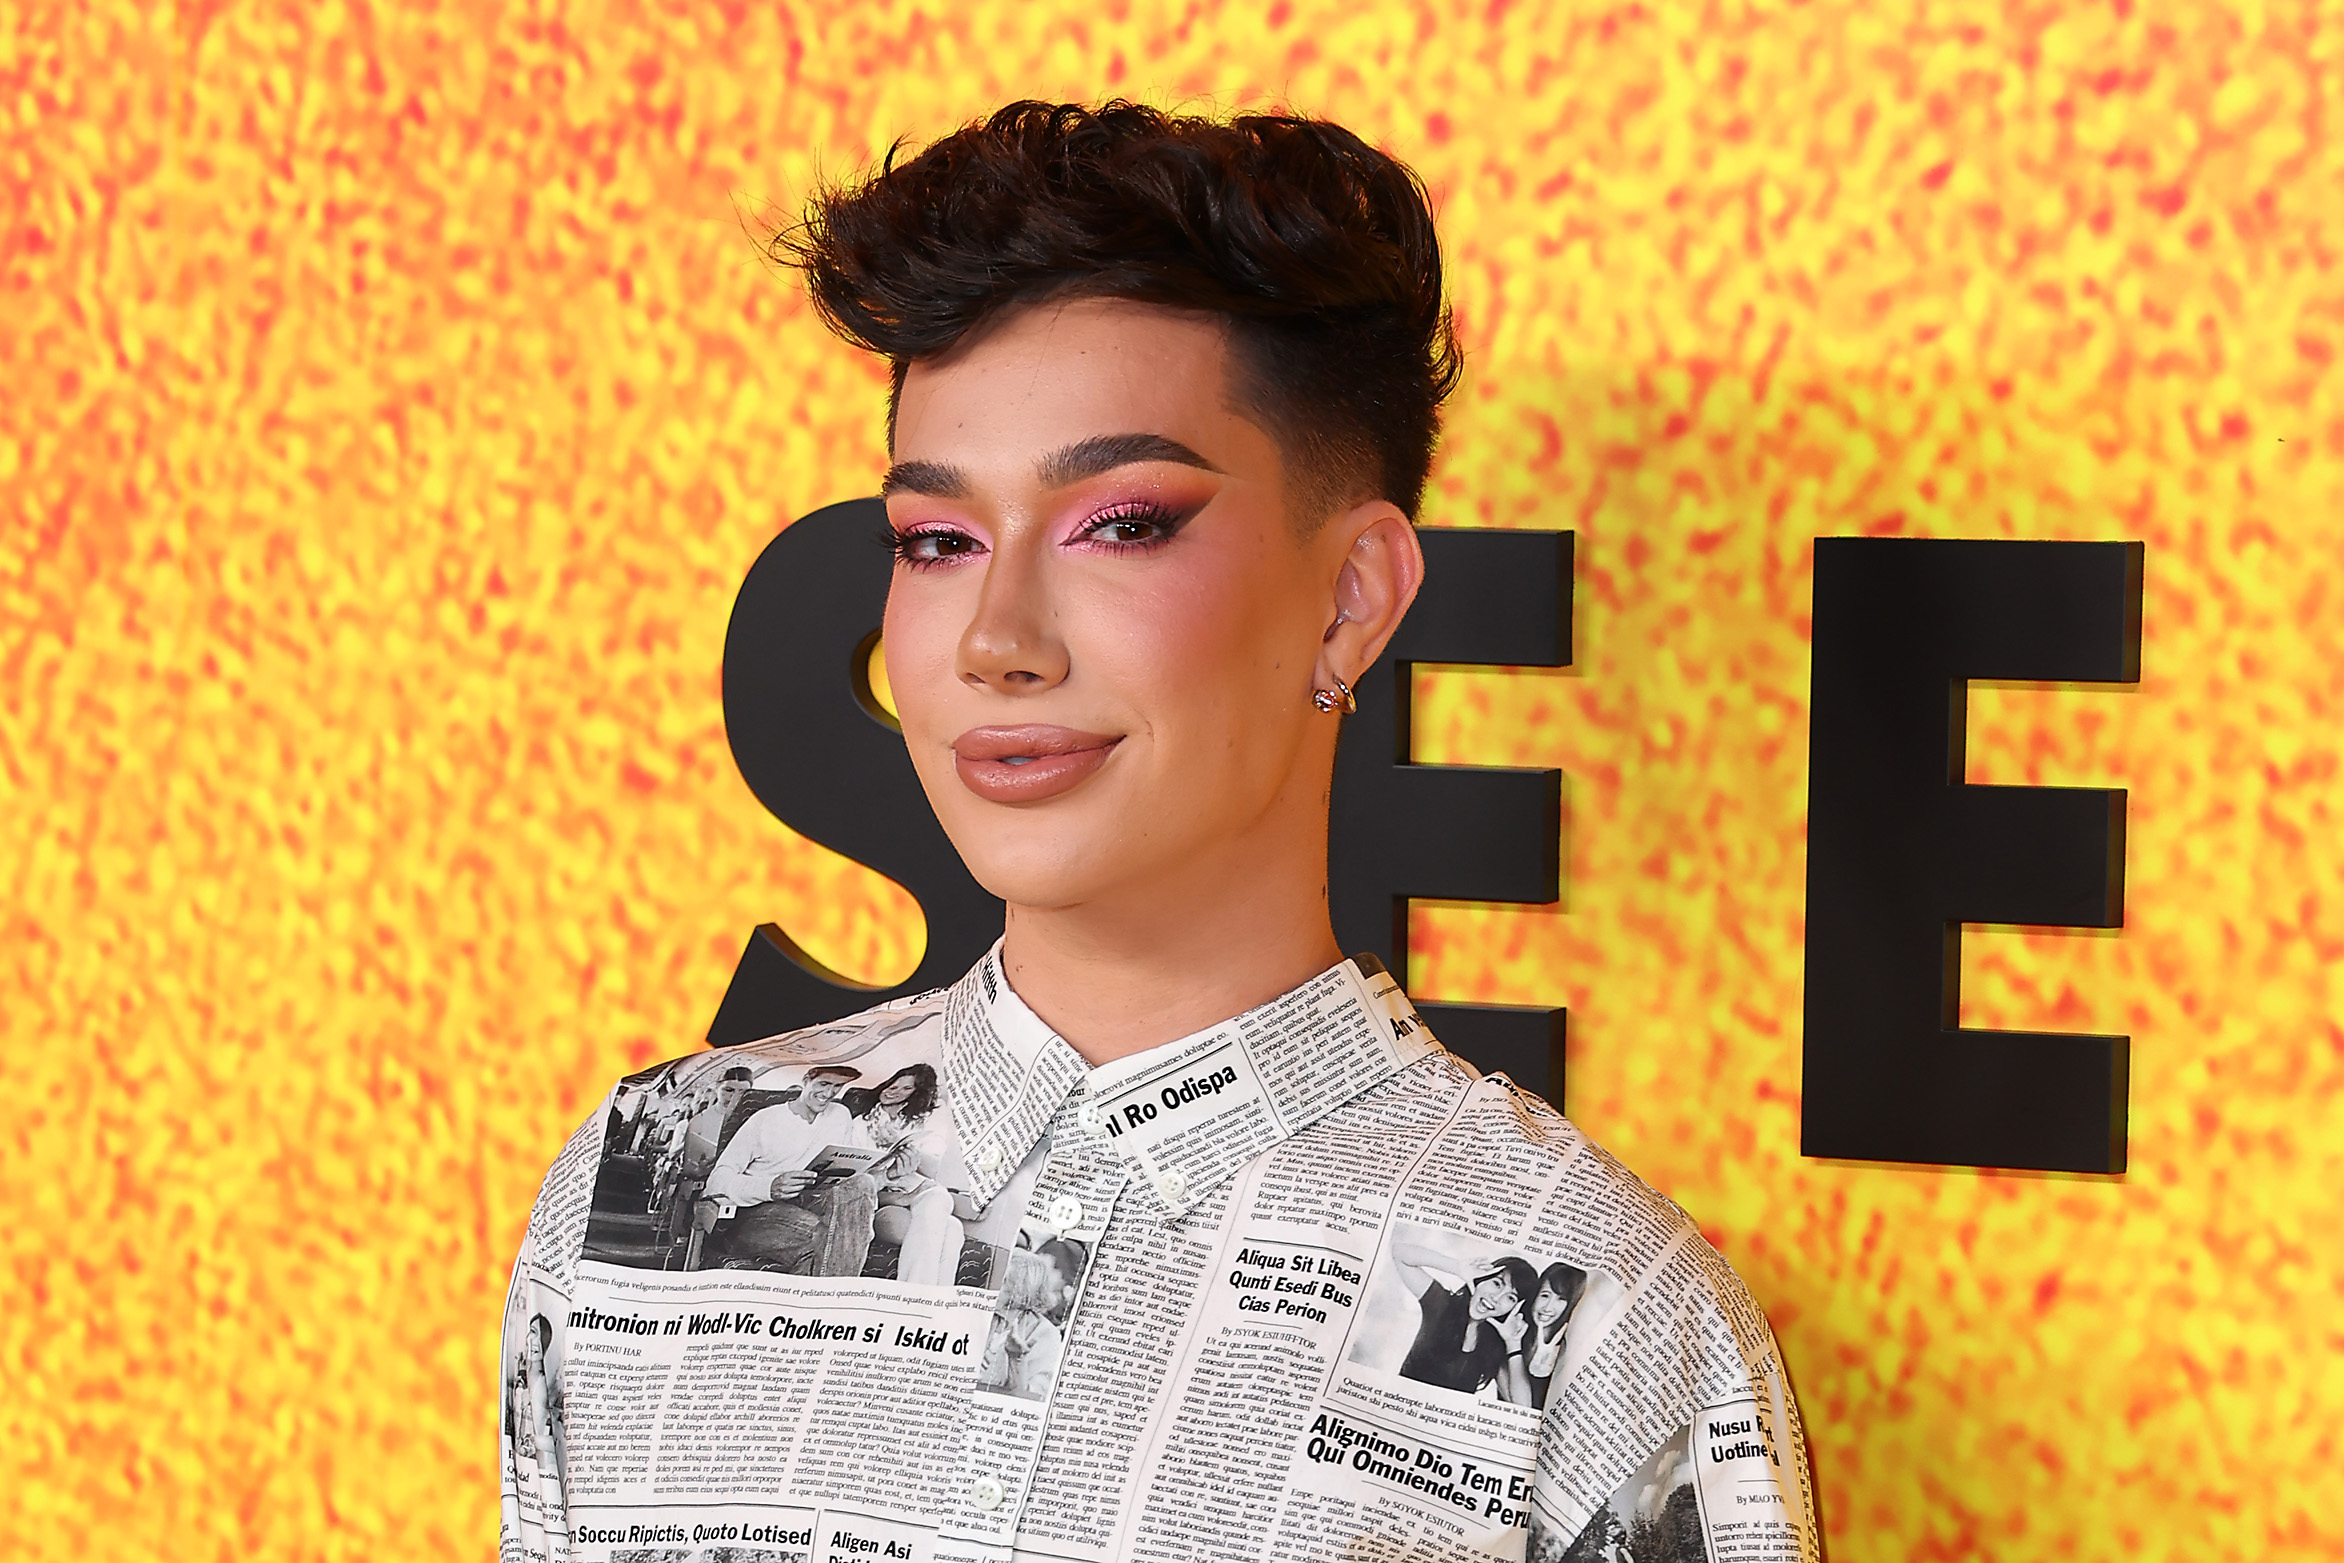 James Charles attends Apple TV+ original series "See" Season 3 Los Angeles premier at DGA Theater Complex on August 23, 2022, in Los Angeles, California. | Source: Getty Images